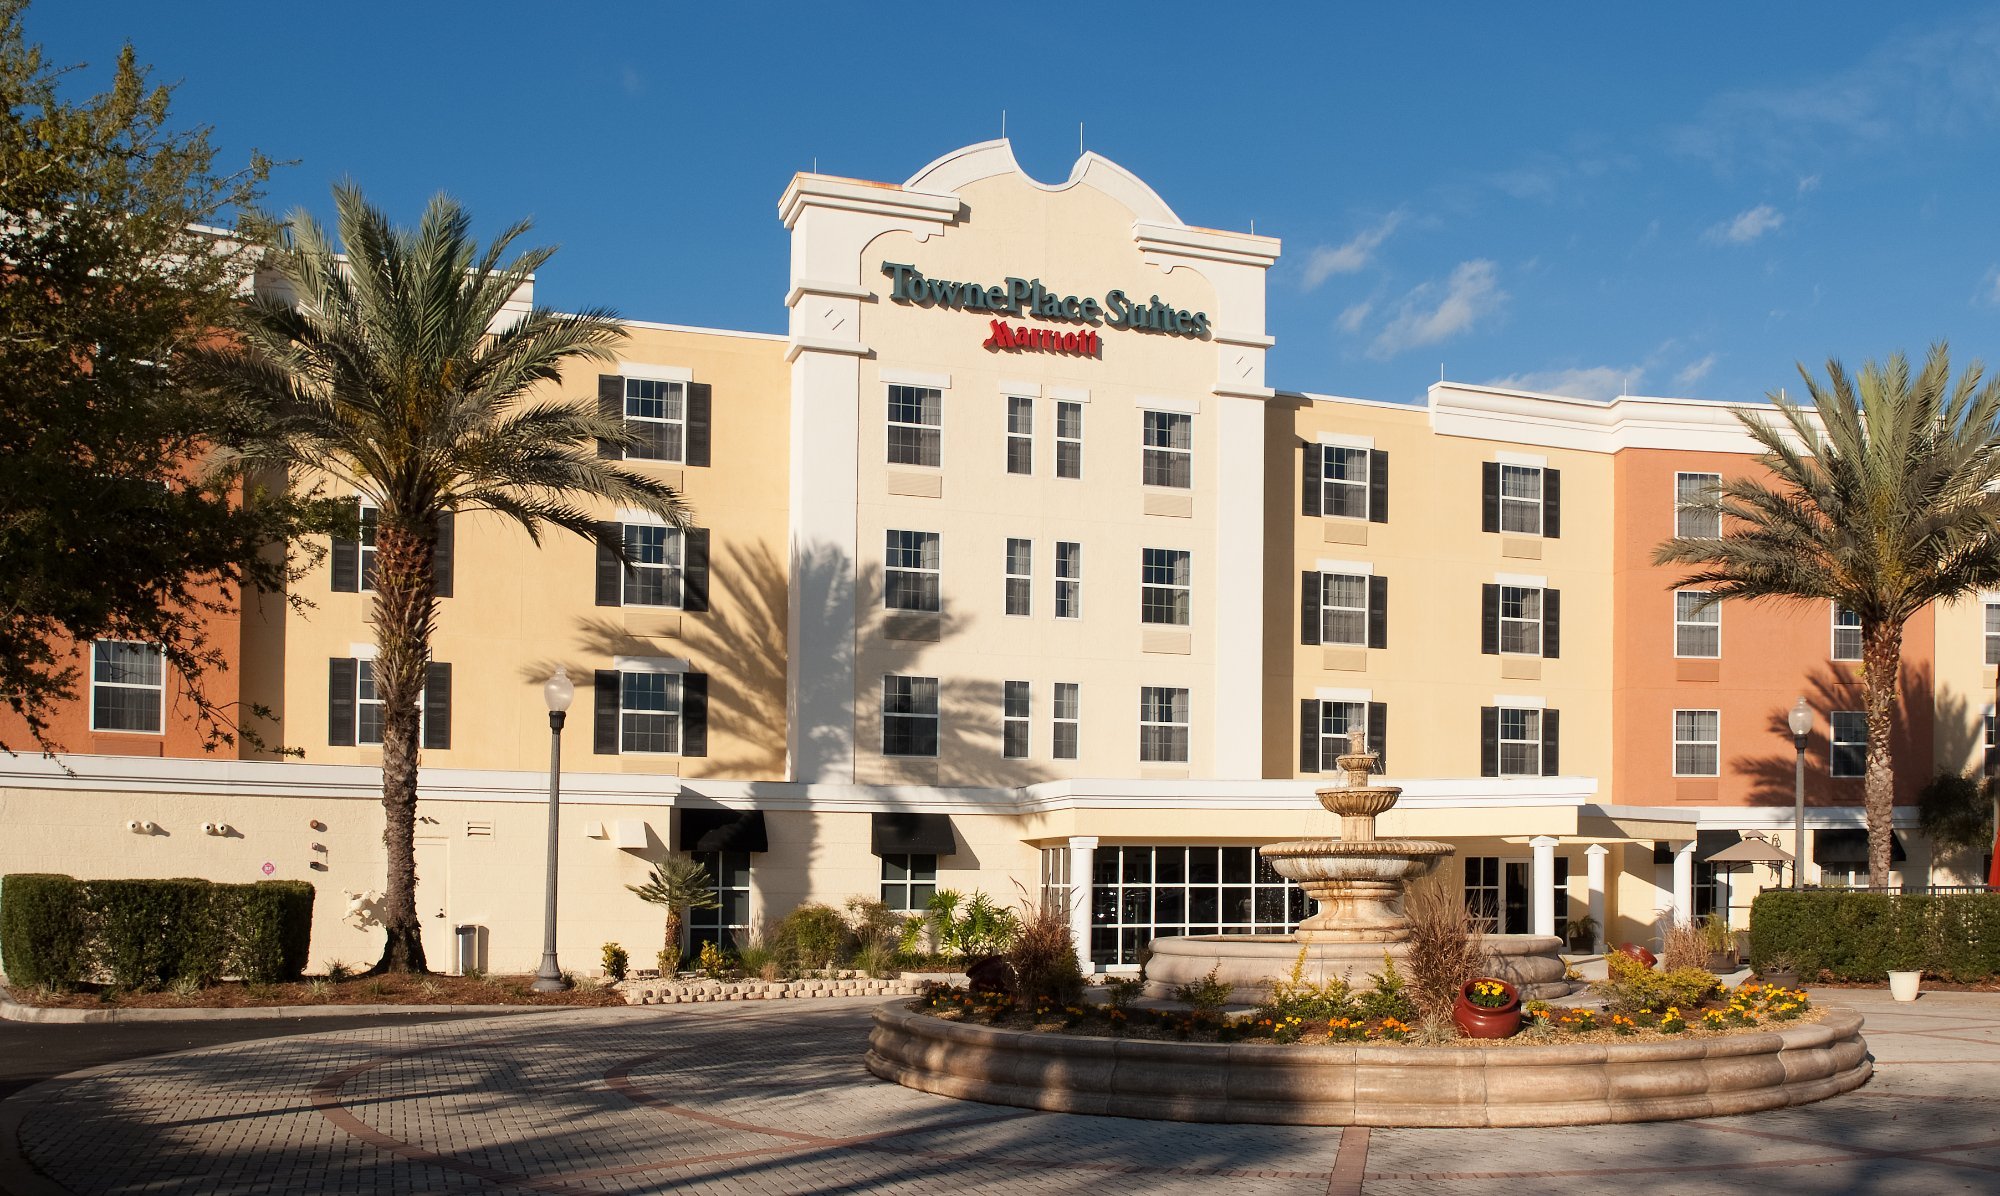 Photo of TownePlace Suites The Villages, The Villages, FL